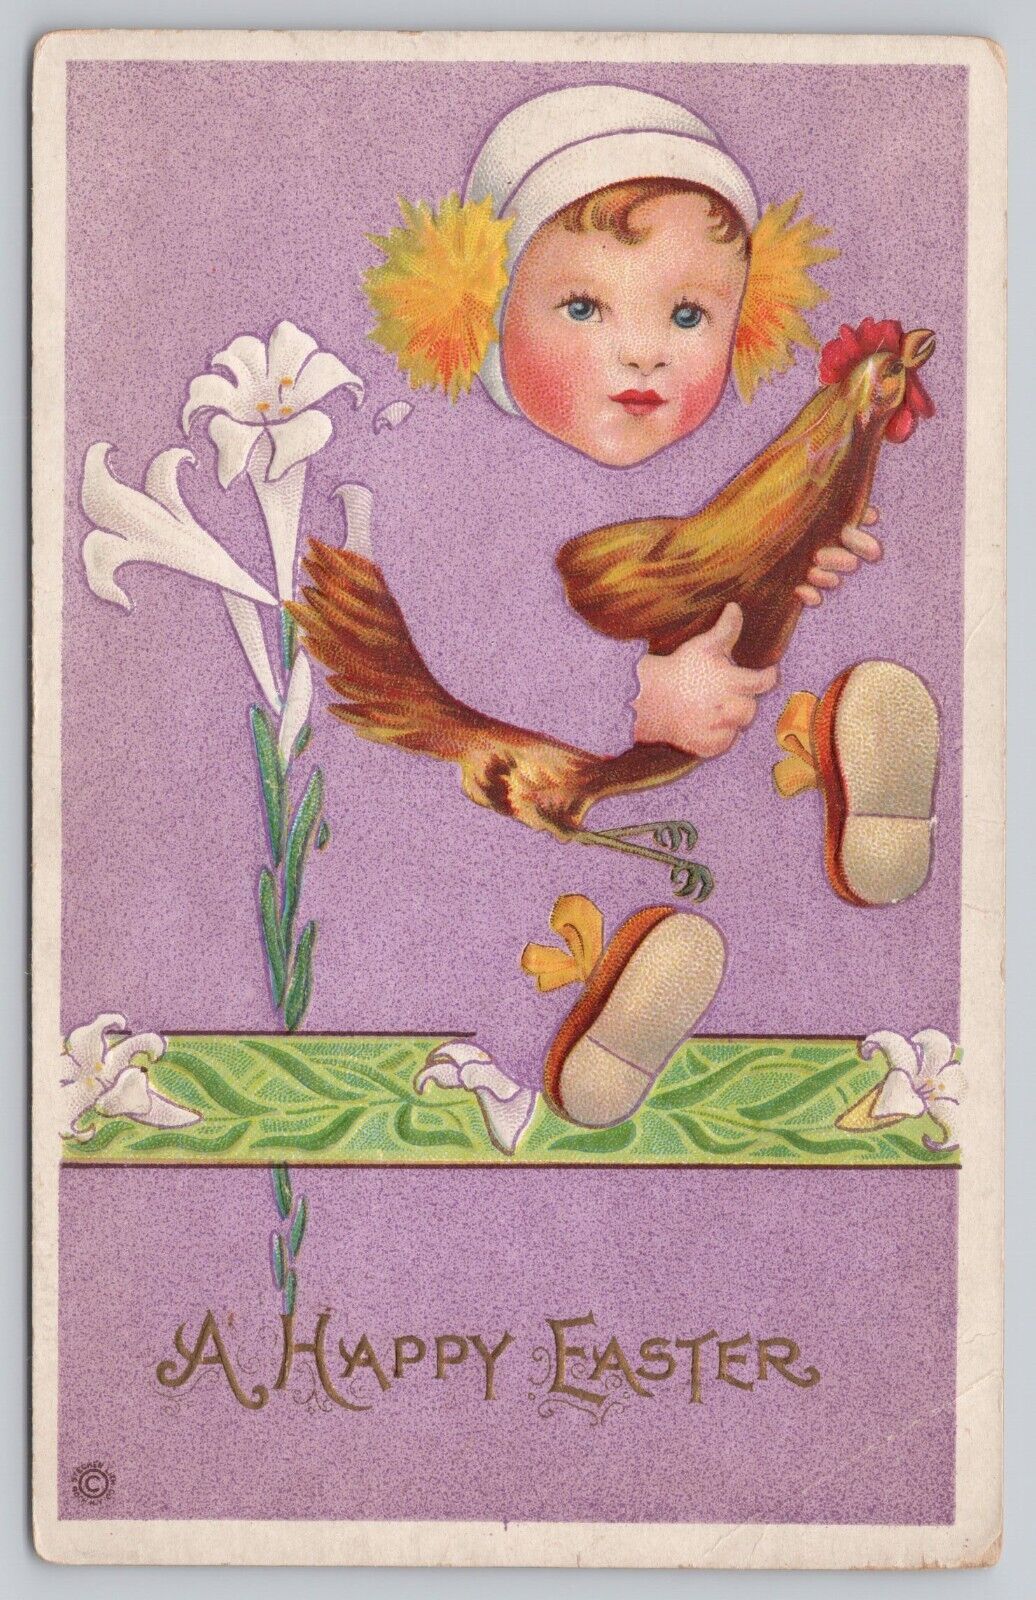 Fantasy Fade Away Happy Easter Child Holds Chicken Embossed Vintage Postcard